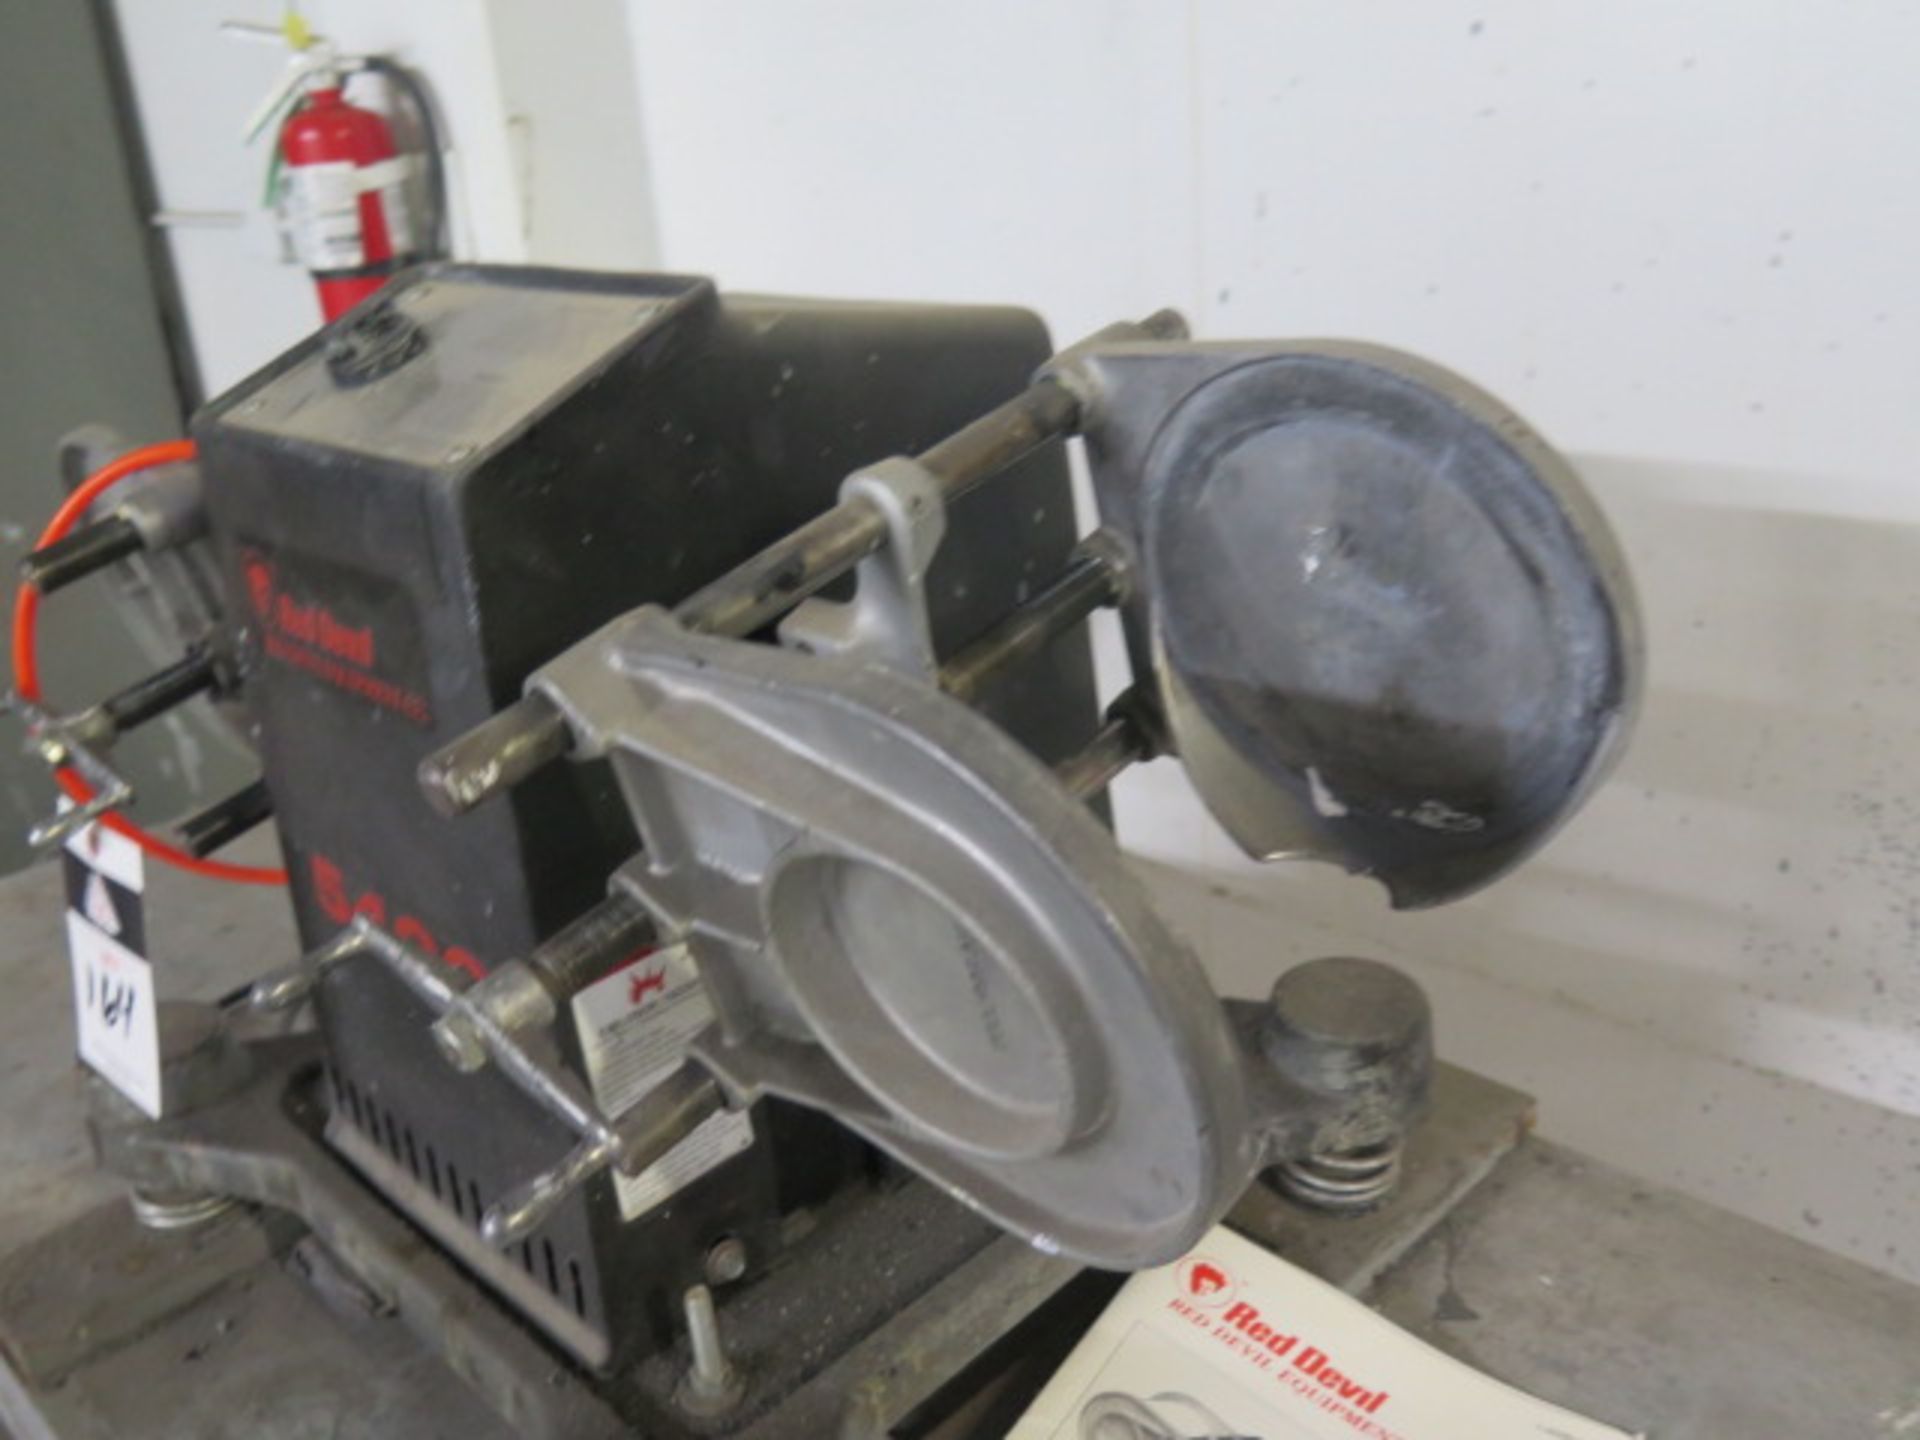 Red Devil mdl. 5400 Paint Shaker (SOLD AS-IS - NO WARRANTY) - Image 3 of 7